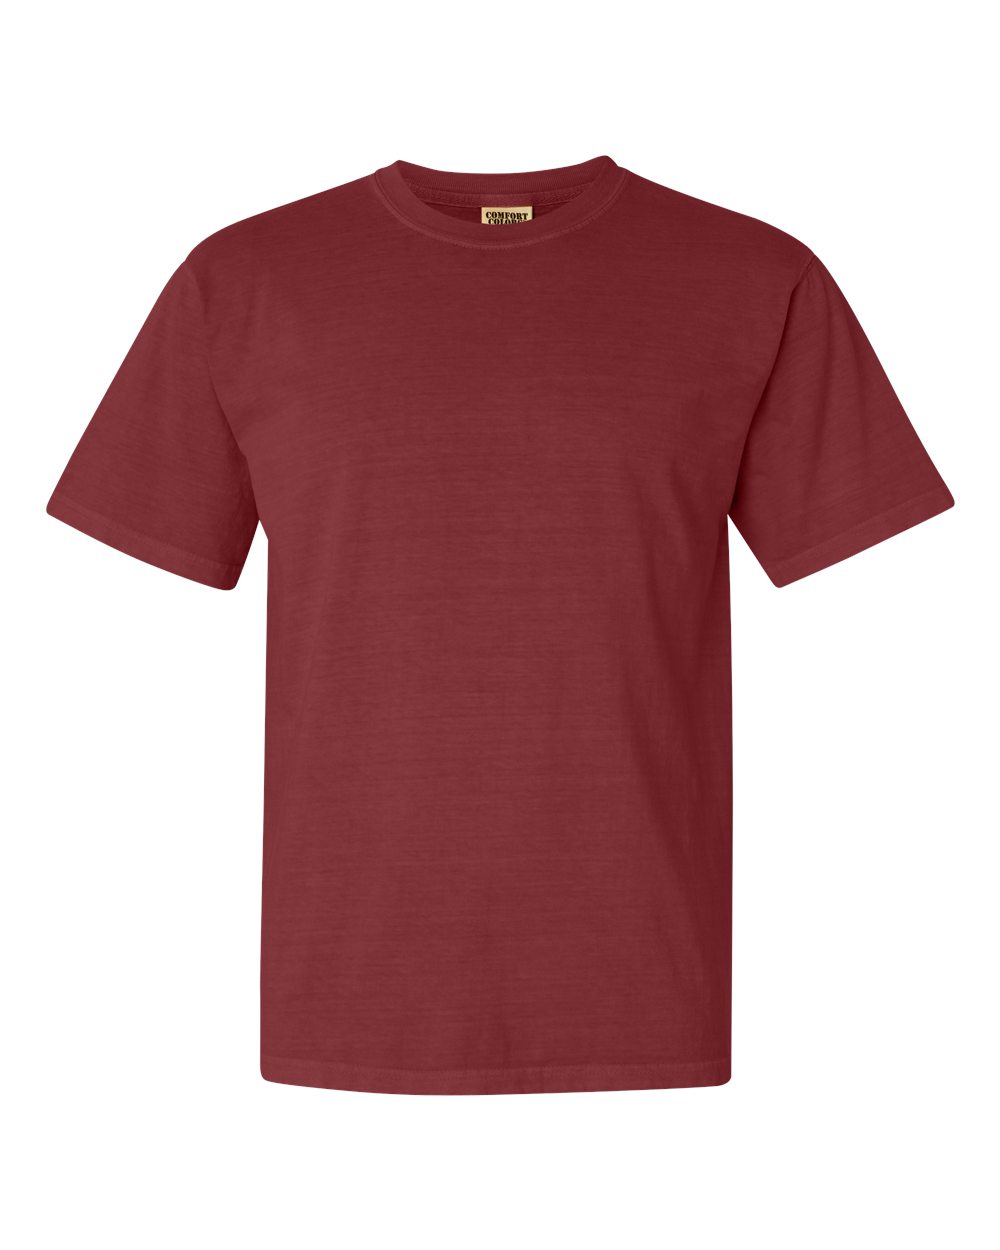 Comfort Colors Garment-Dyed Tee (1717) in Brick